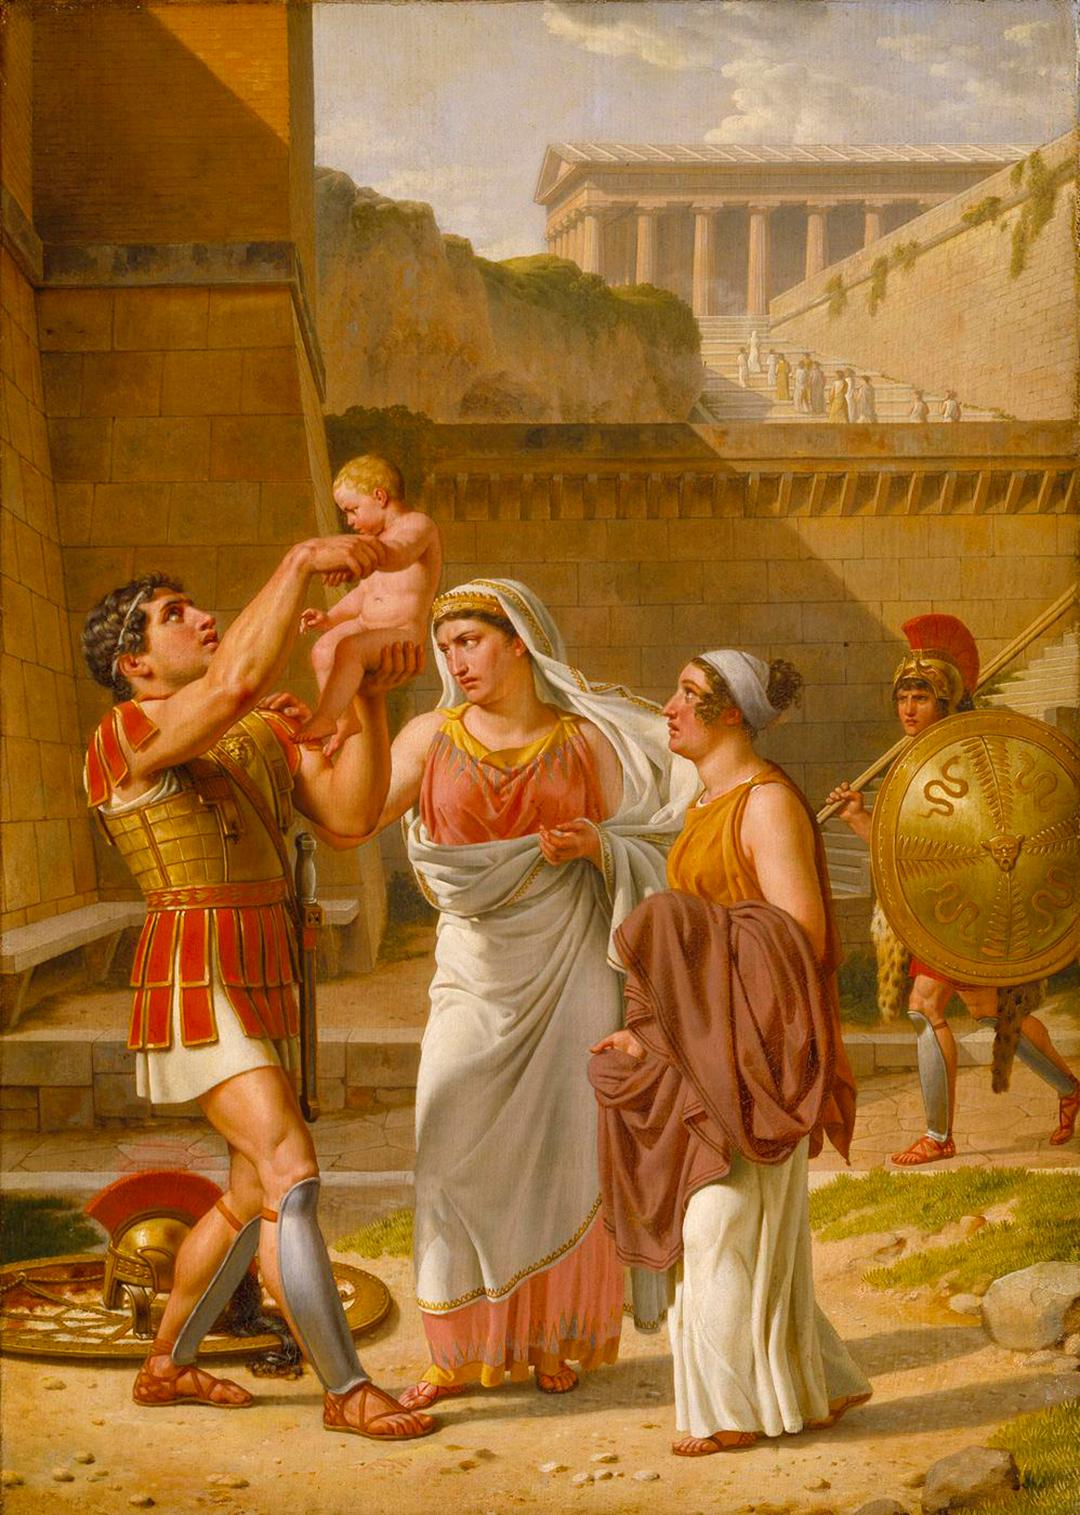 "Raising his son he kissed him," wrote Homer in the "Iliad," while taking a reprieve from battle. "Hector Bidding Farewell to Andromache and Astyanax," circa 1813–1816, by Christoffer Wilhelm Eckersberg. Oil on canvas. Thorvaldsens Museum, Copenhagen, Denmark. (Public Domain)